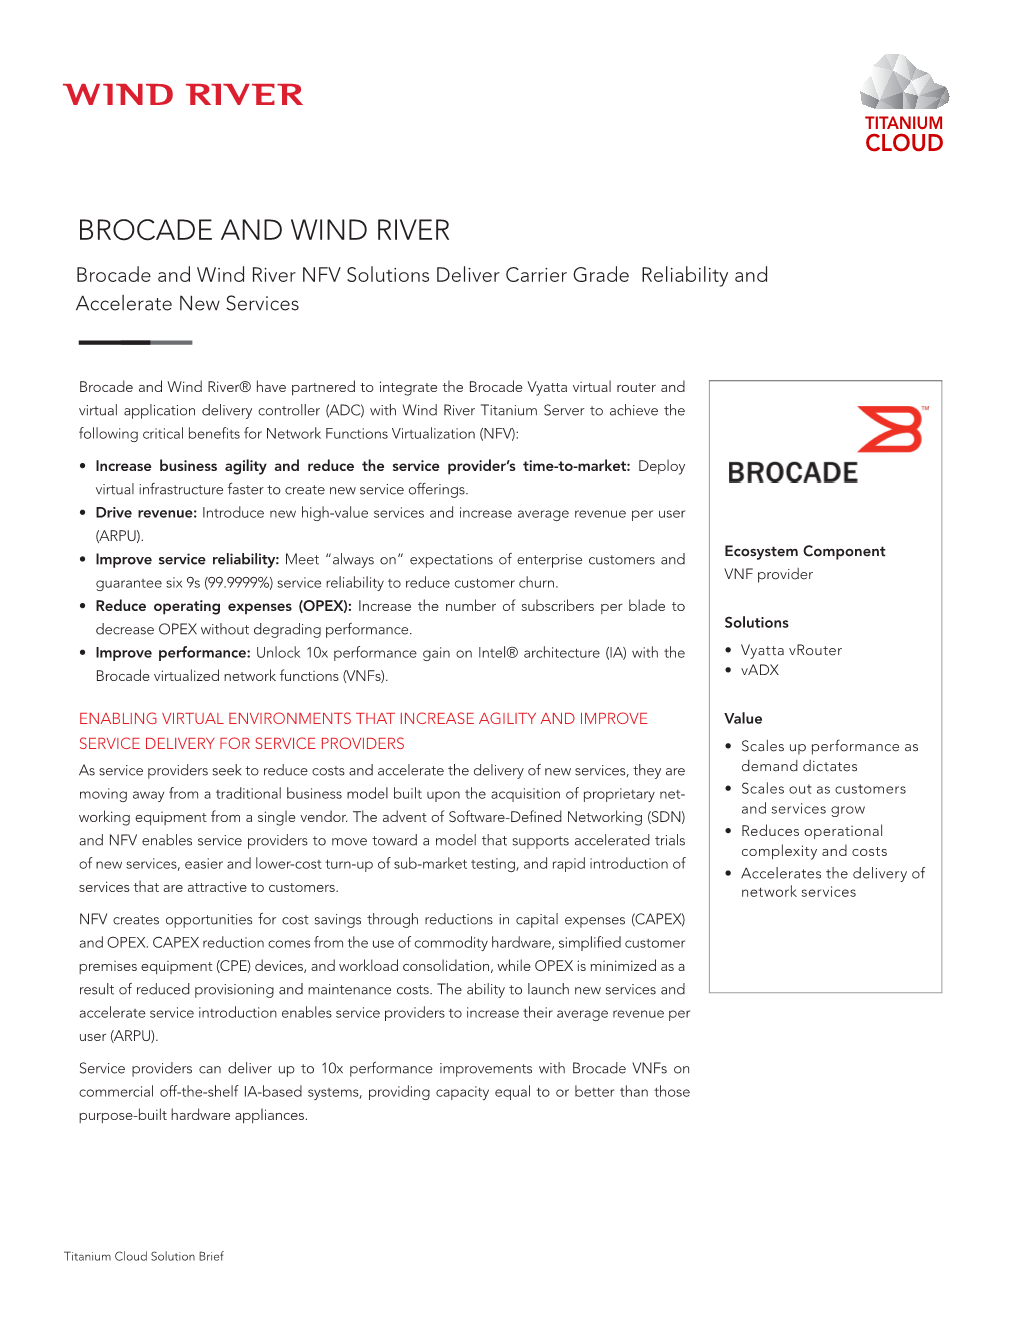 BROCADE and WIND RIVER Brocade and Wind River NFV Solutions Deliver Carrier Grade Reliability and Accelerate New Services